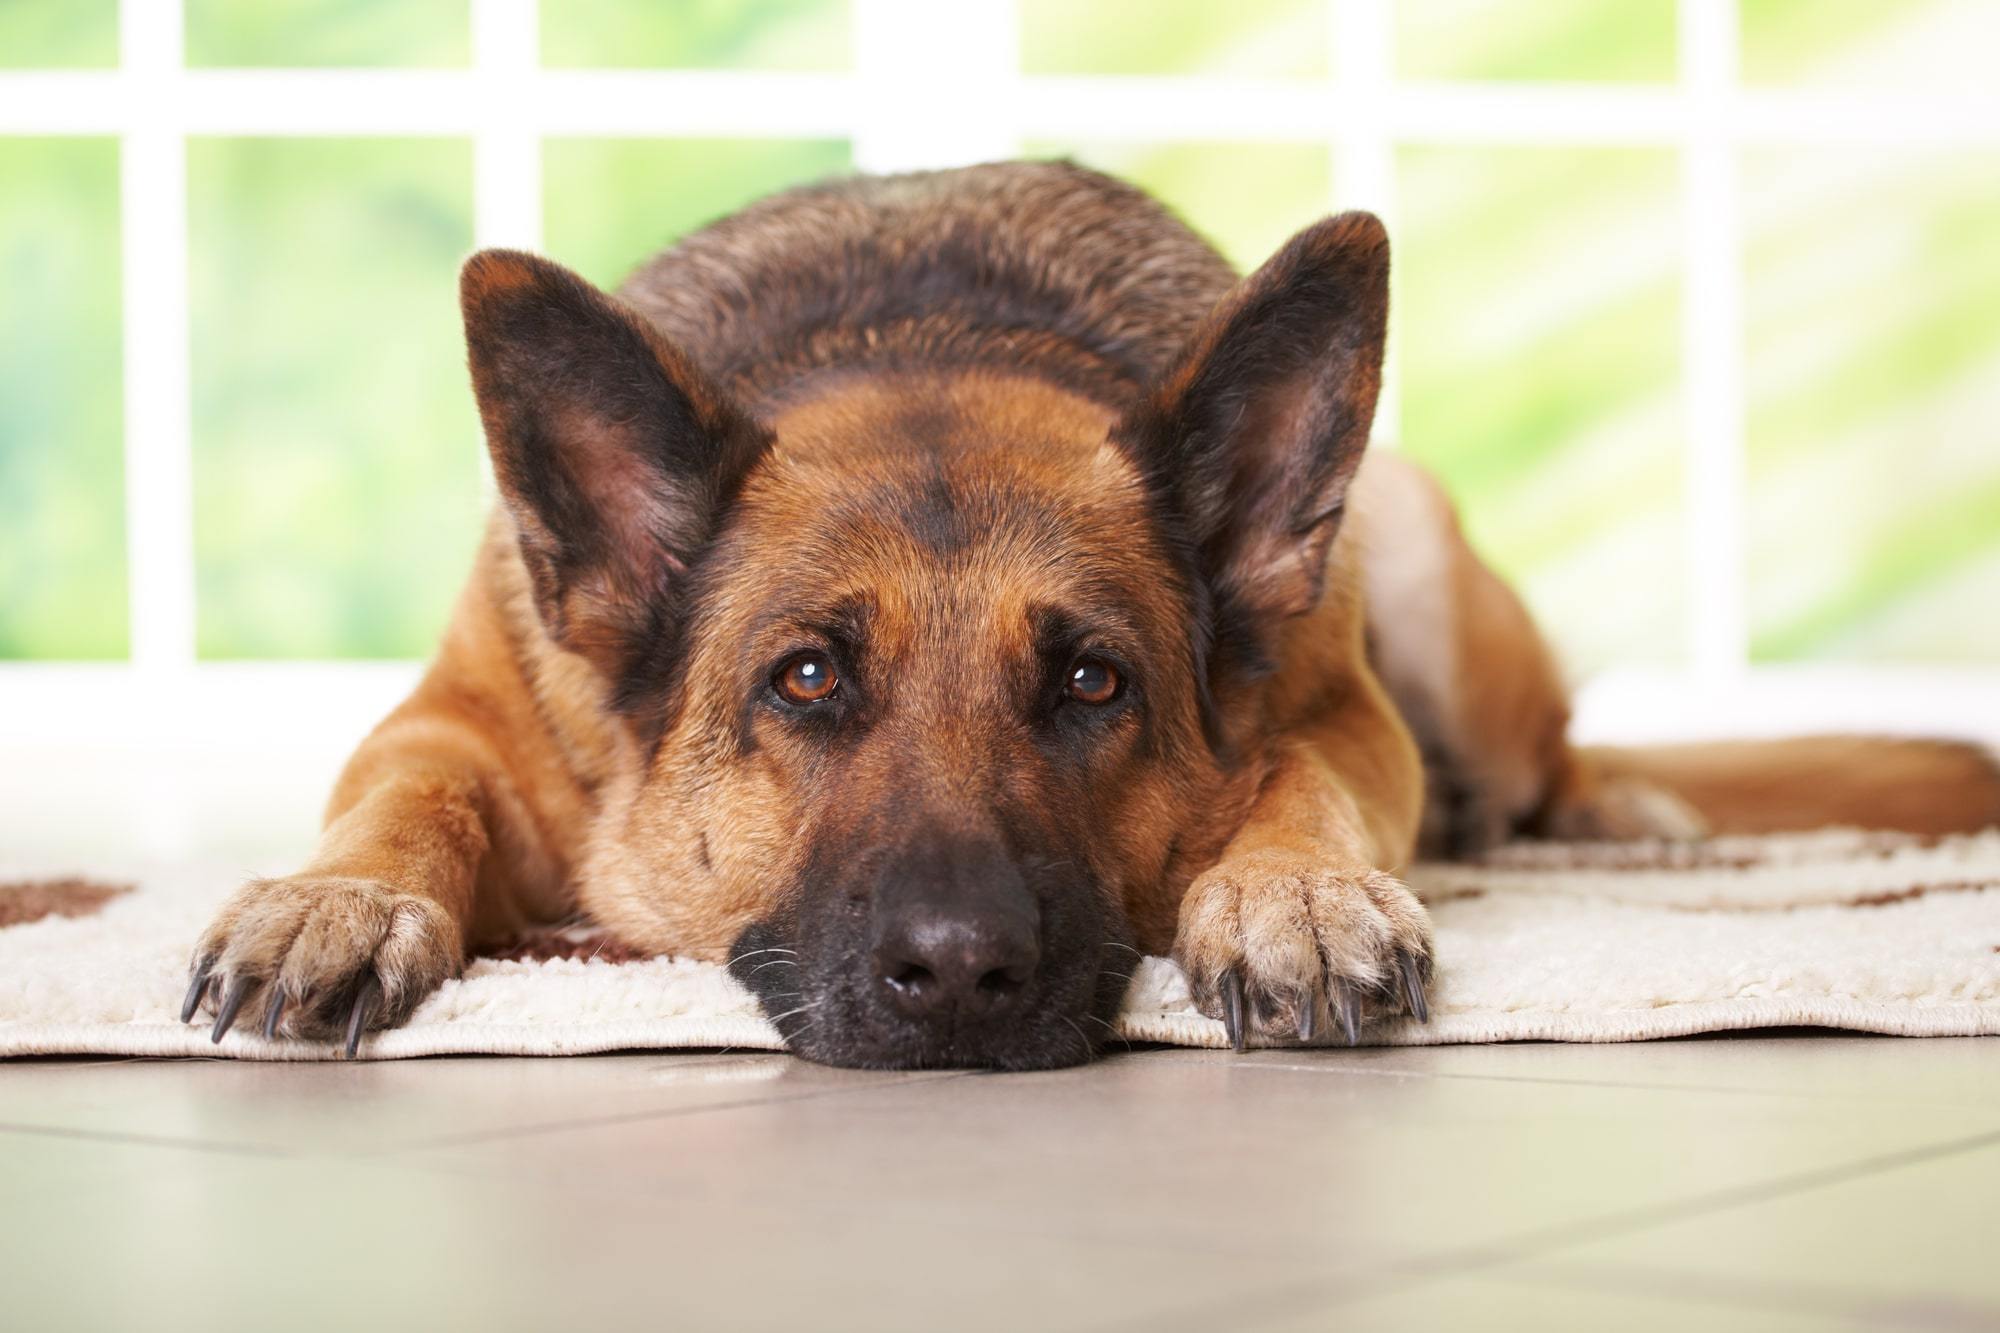 How to Relieve Joint Pain in Dogs